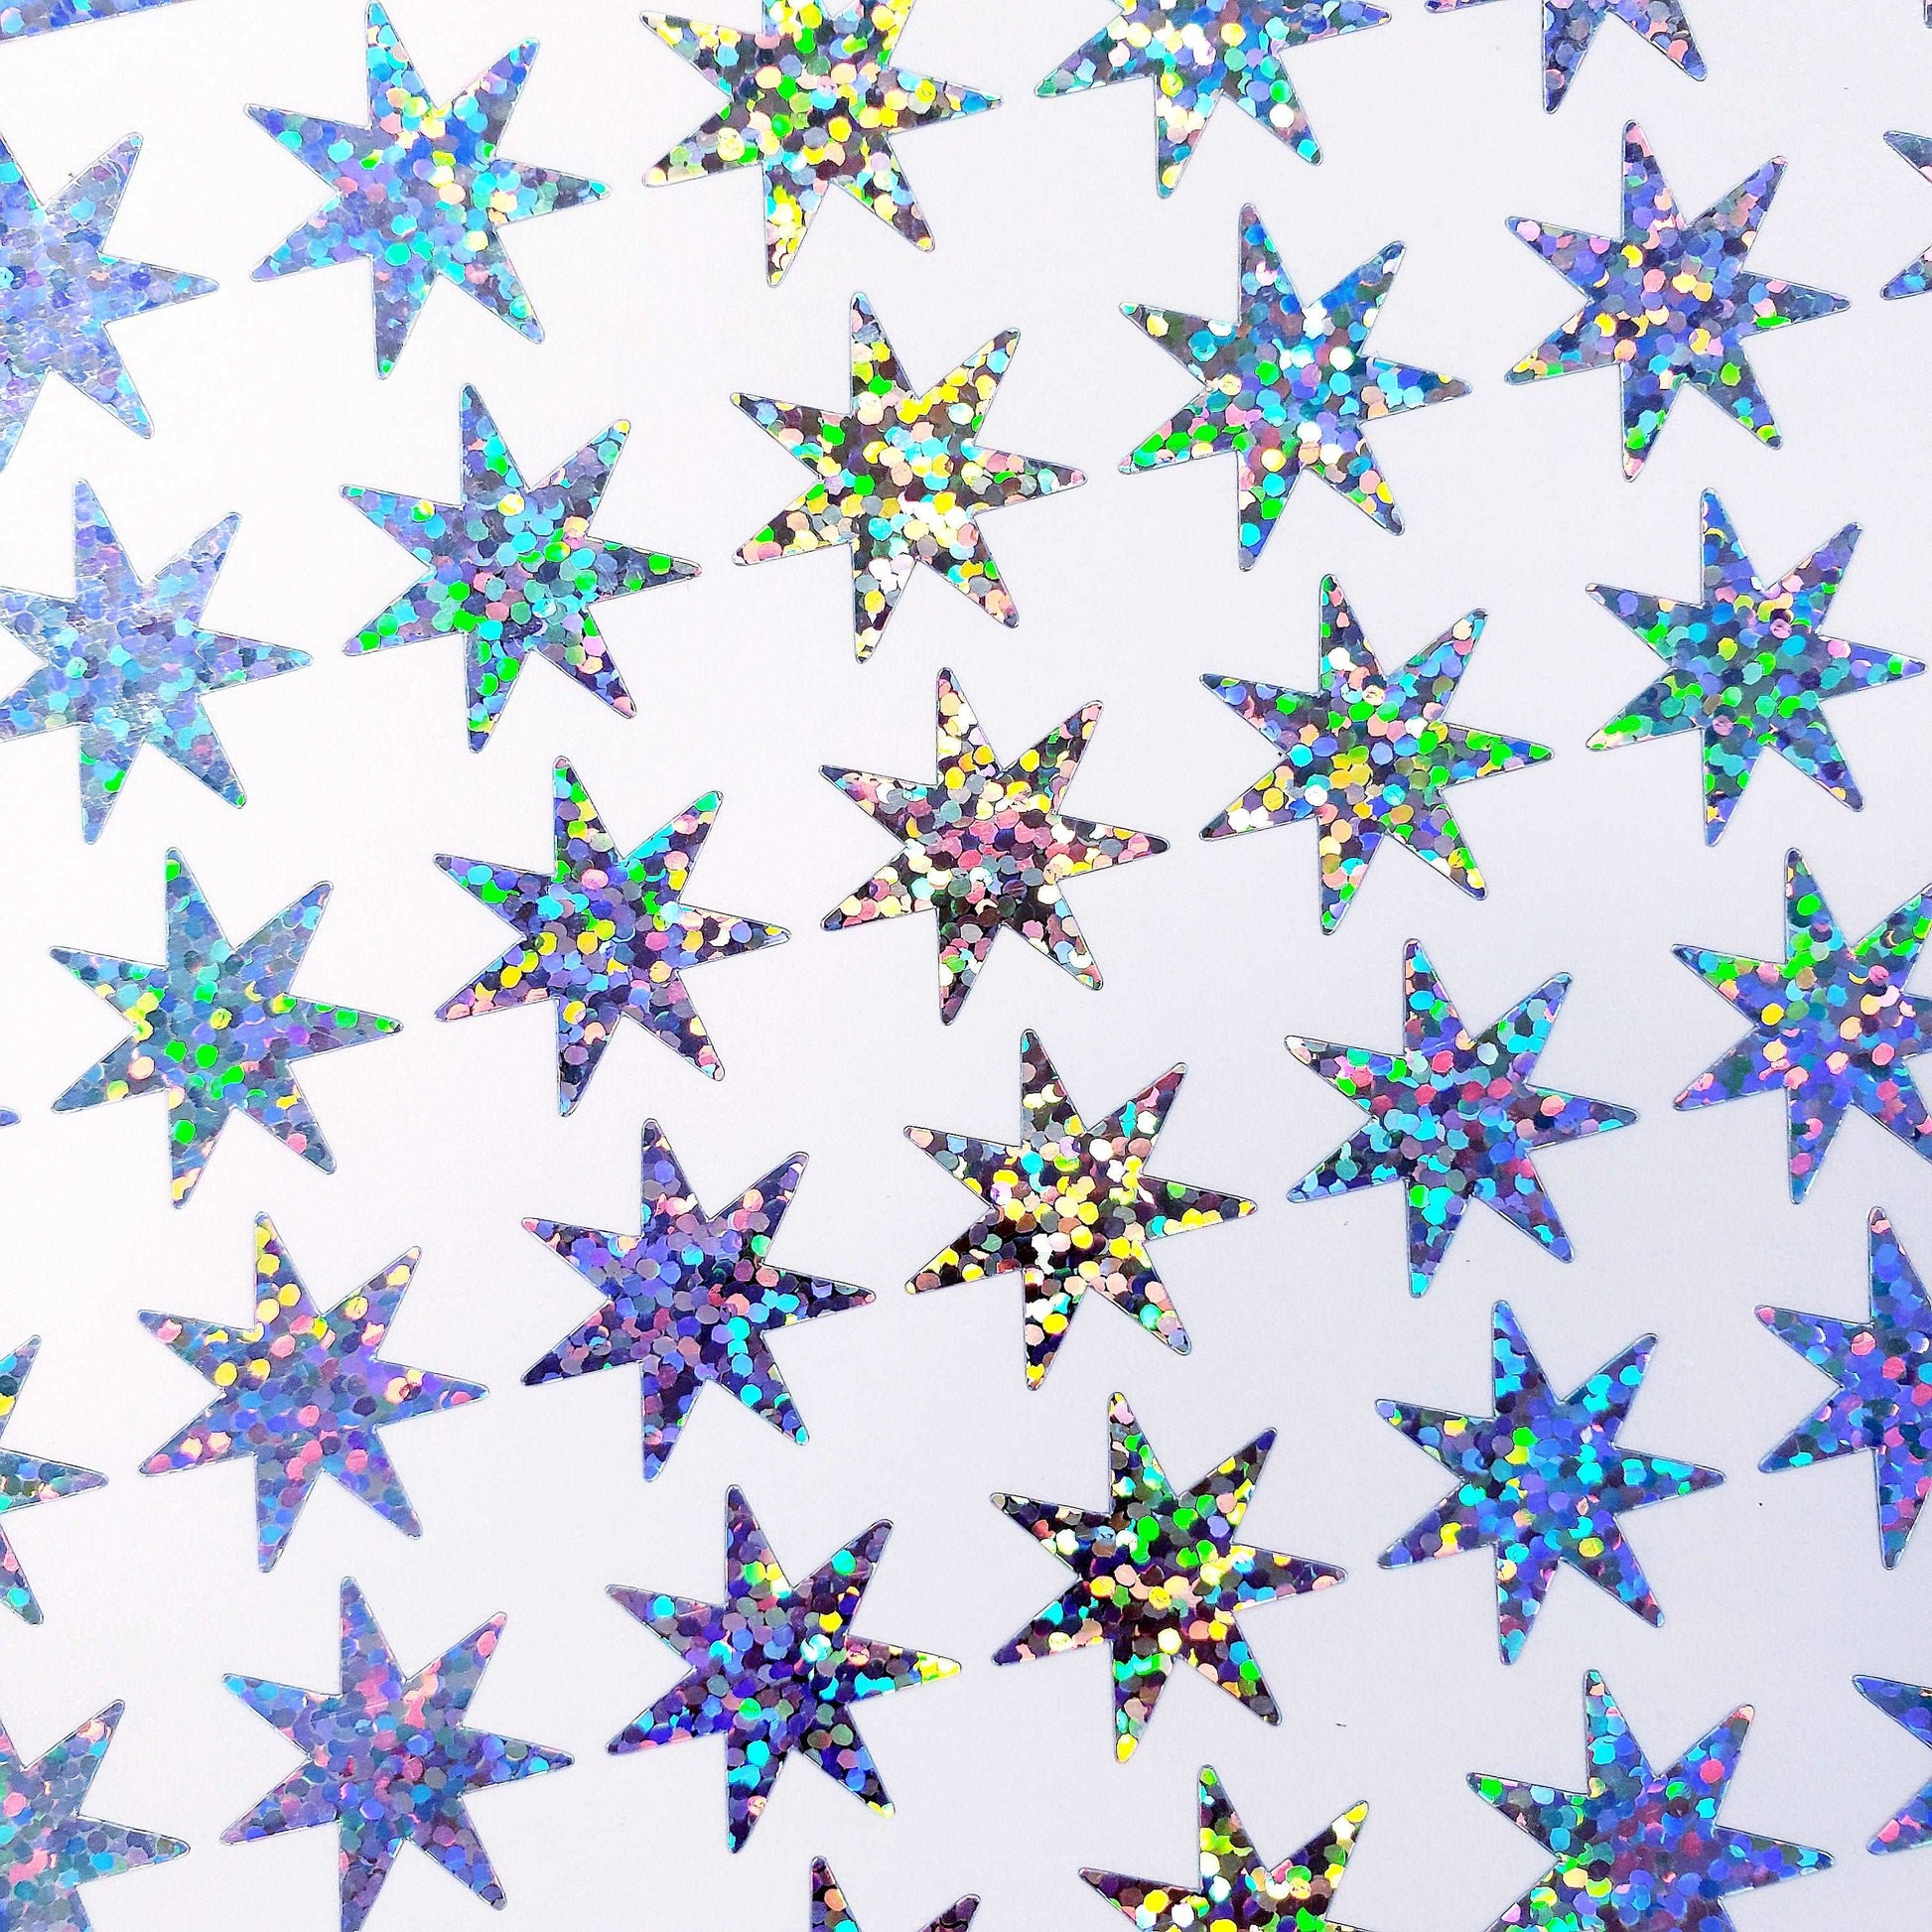 Seven Pointed Starburst Sticker Sheet, set of 48 sparkly star stickers for ornaments, journals, planners, gift tags and craft projects.